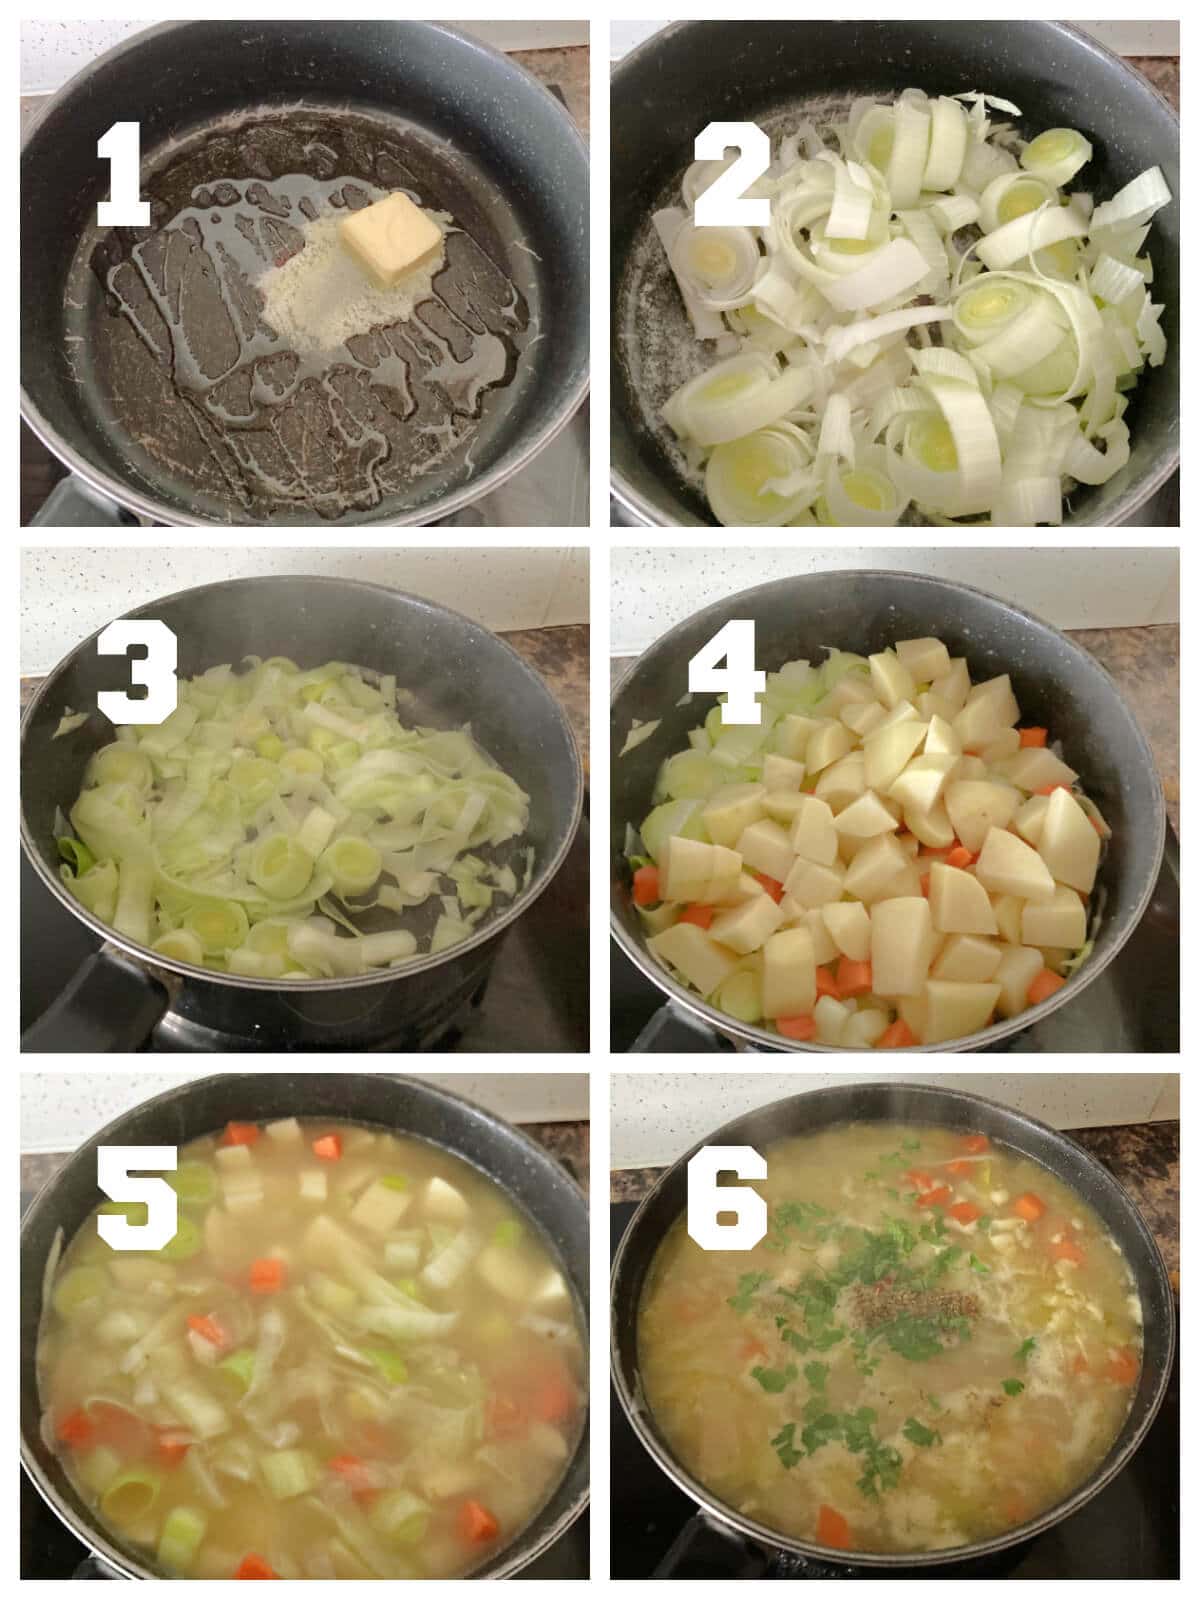 Collage of 6 photos to show how to make chunky leek and potato soup.